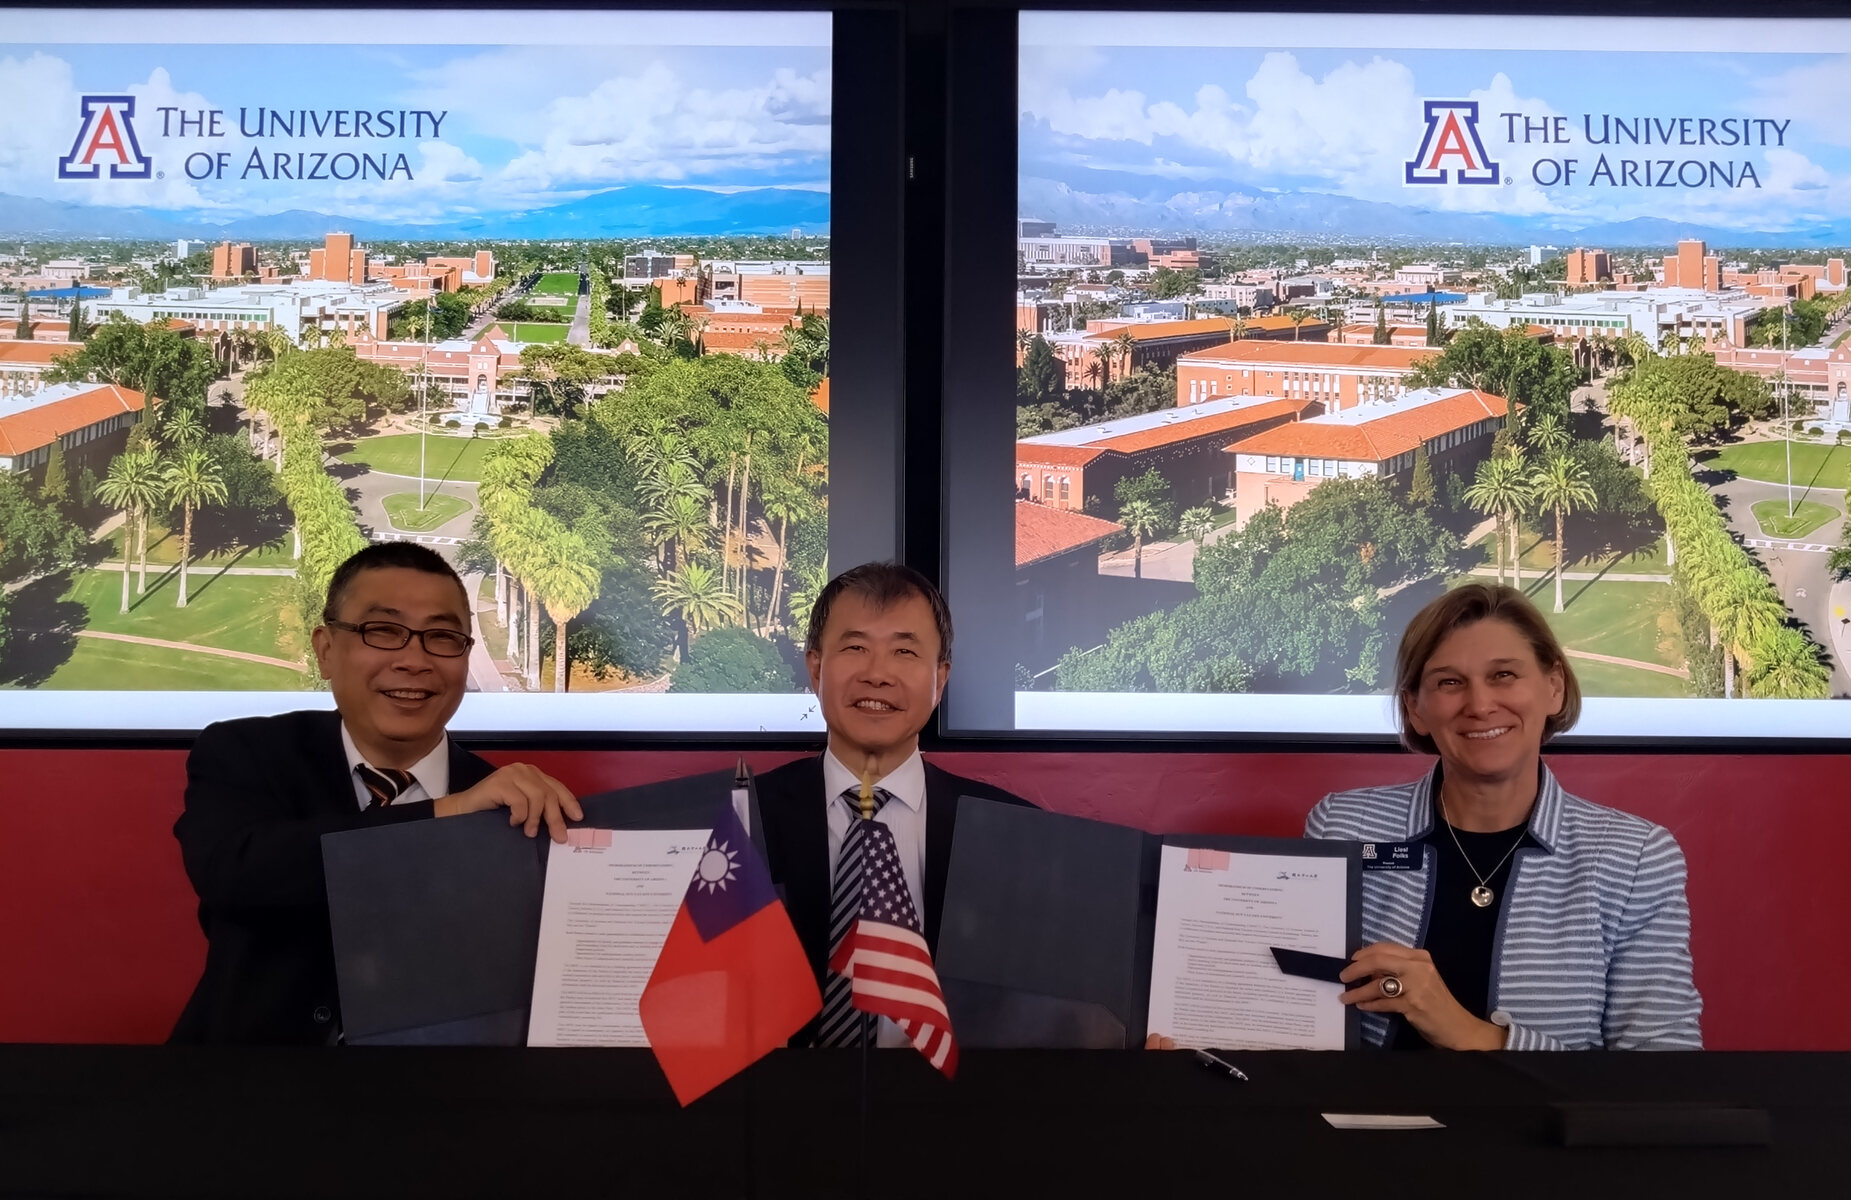 NSYSU signed an MOU with The University of Arizona